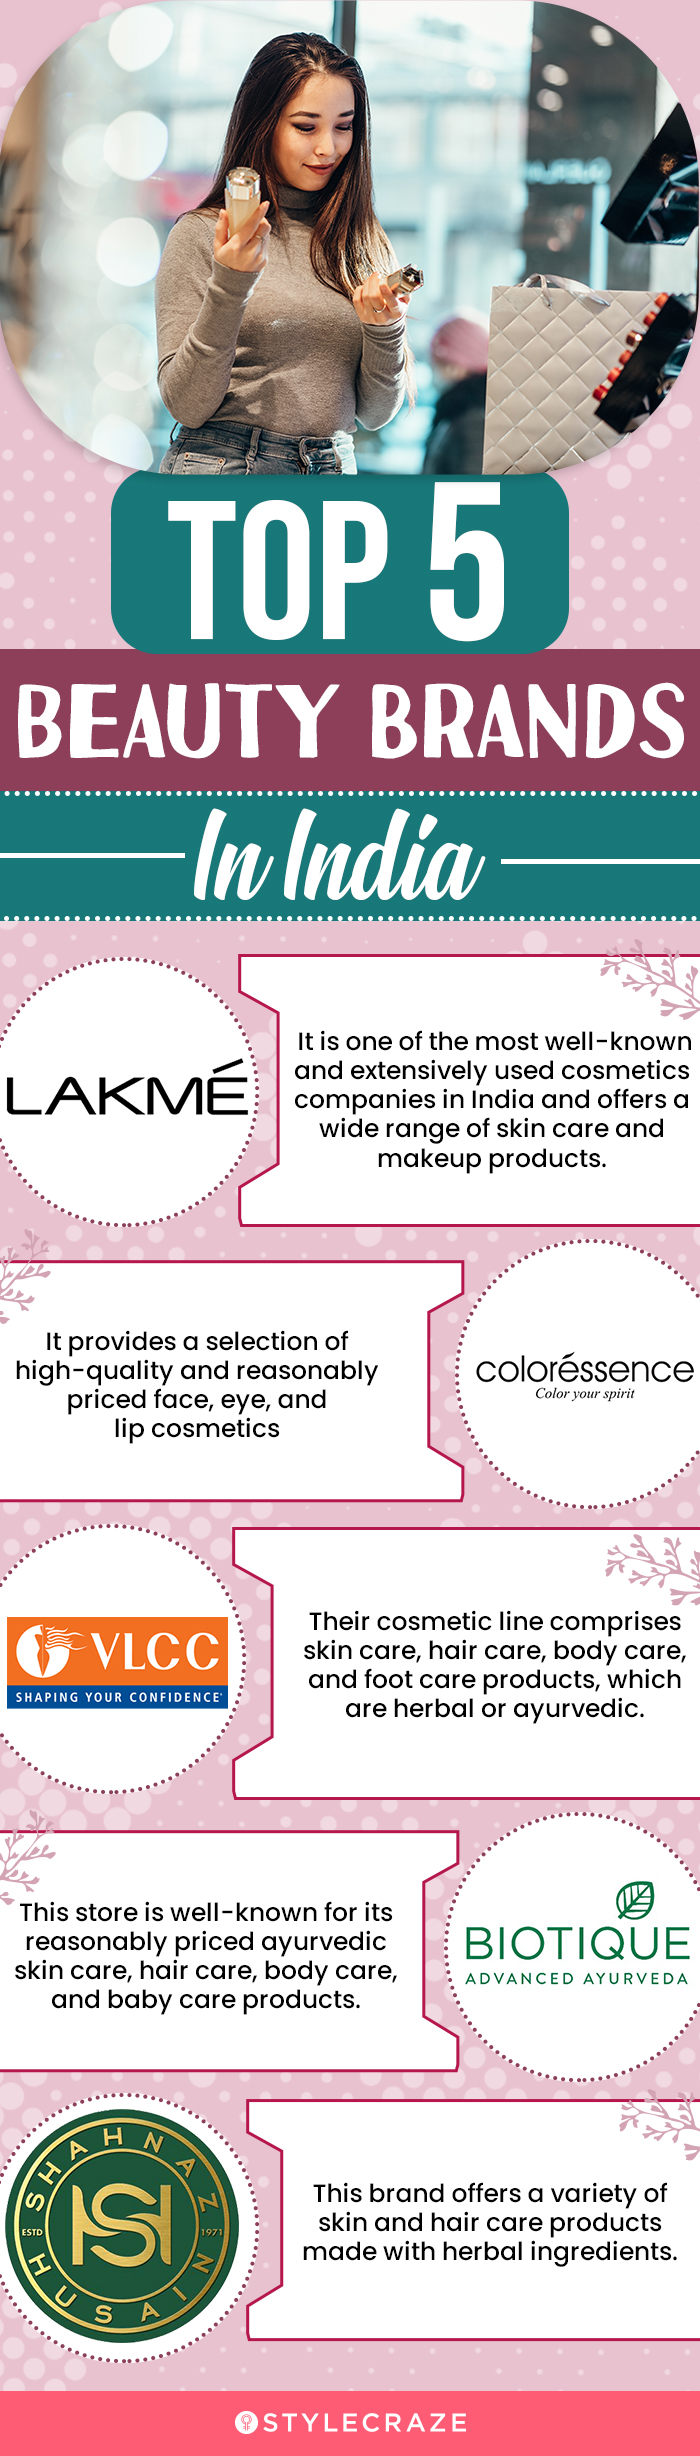 top 5 beauty brands in india (infographic)